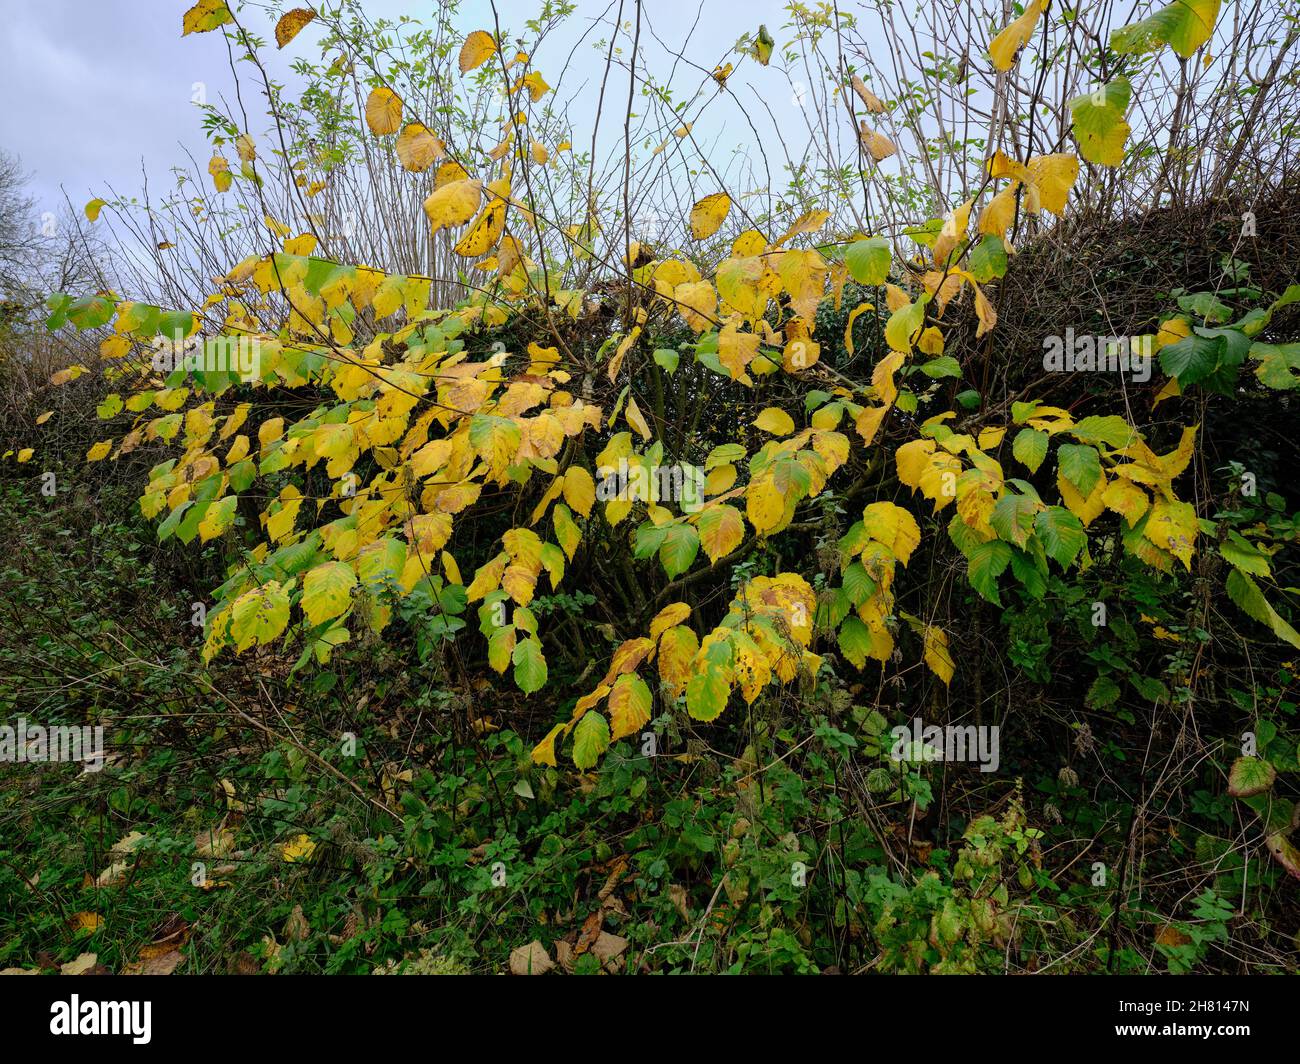 In full autumn colours, a healthy and thriving hedgerow on the banks of the river Ure Stock Photo